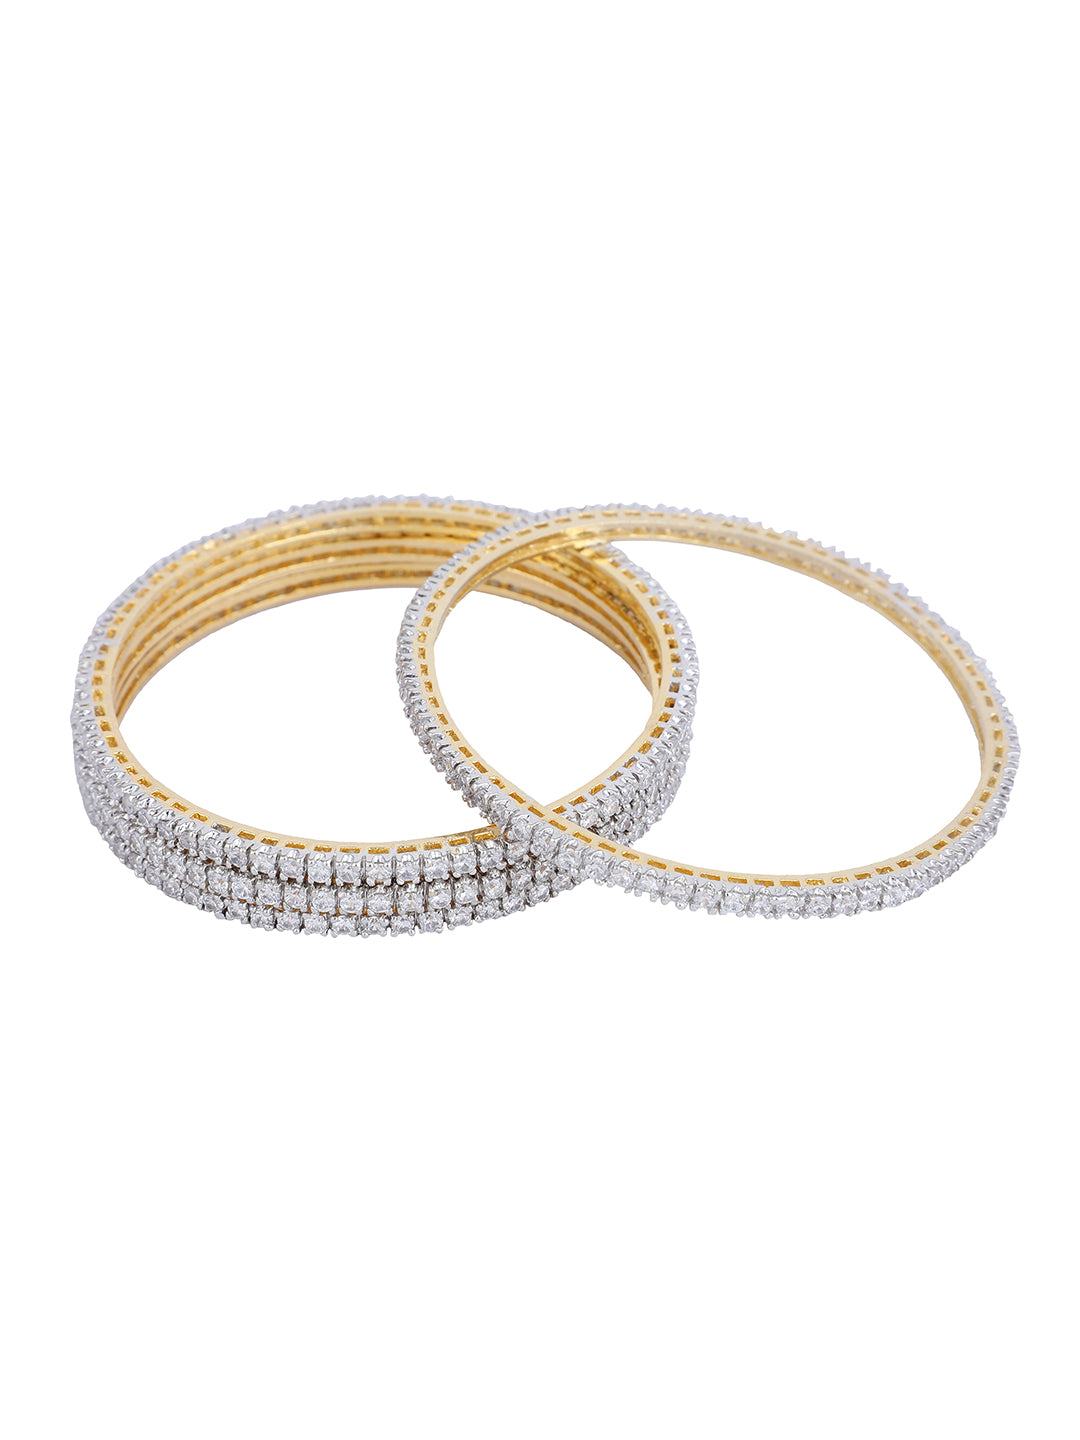 Women's  Set Of 4 Gold-Plated AD/CZ Studded Bangles - Anikas Creation